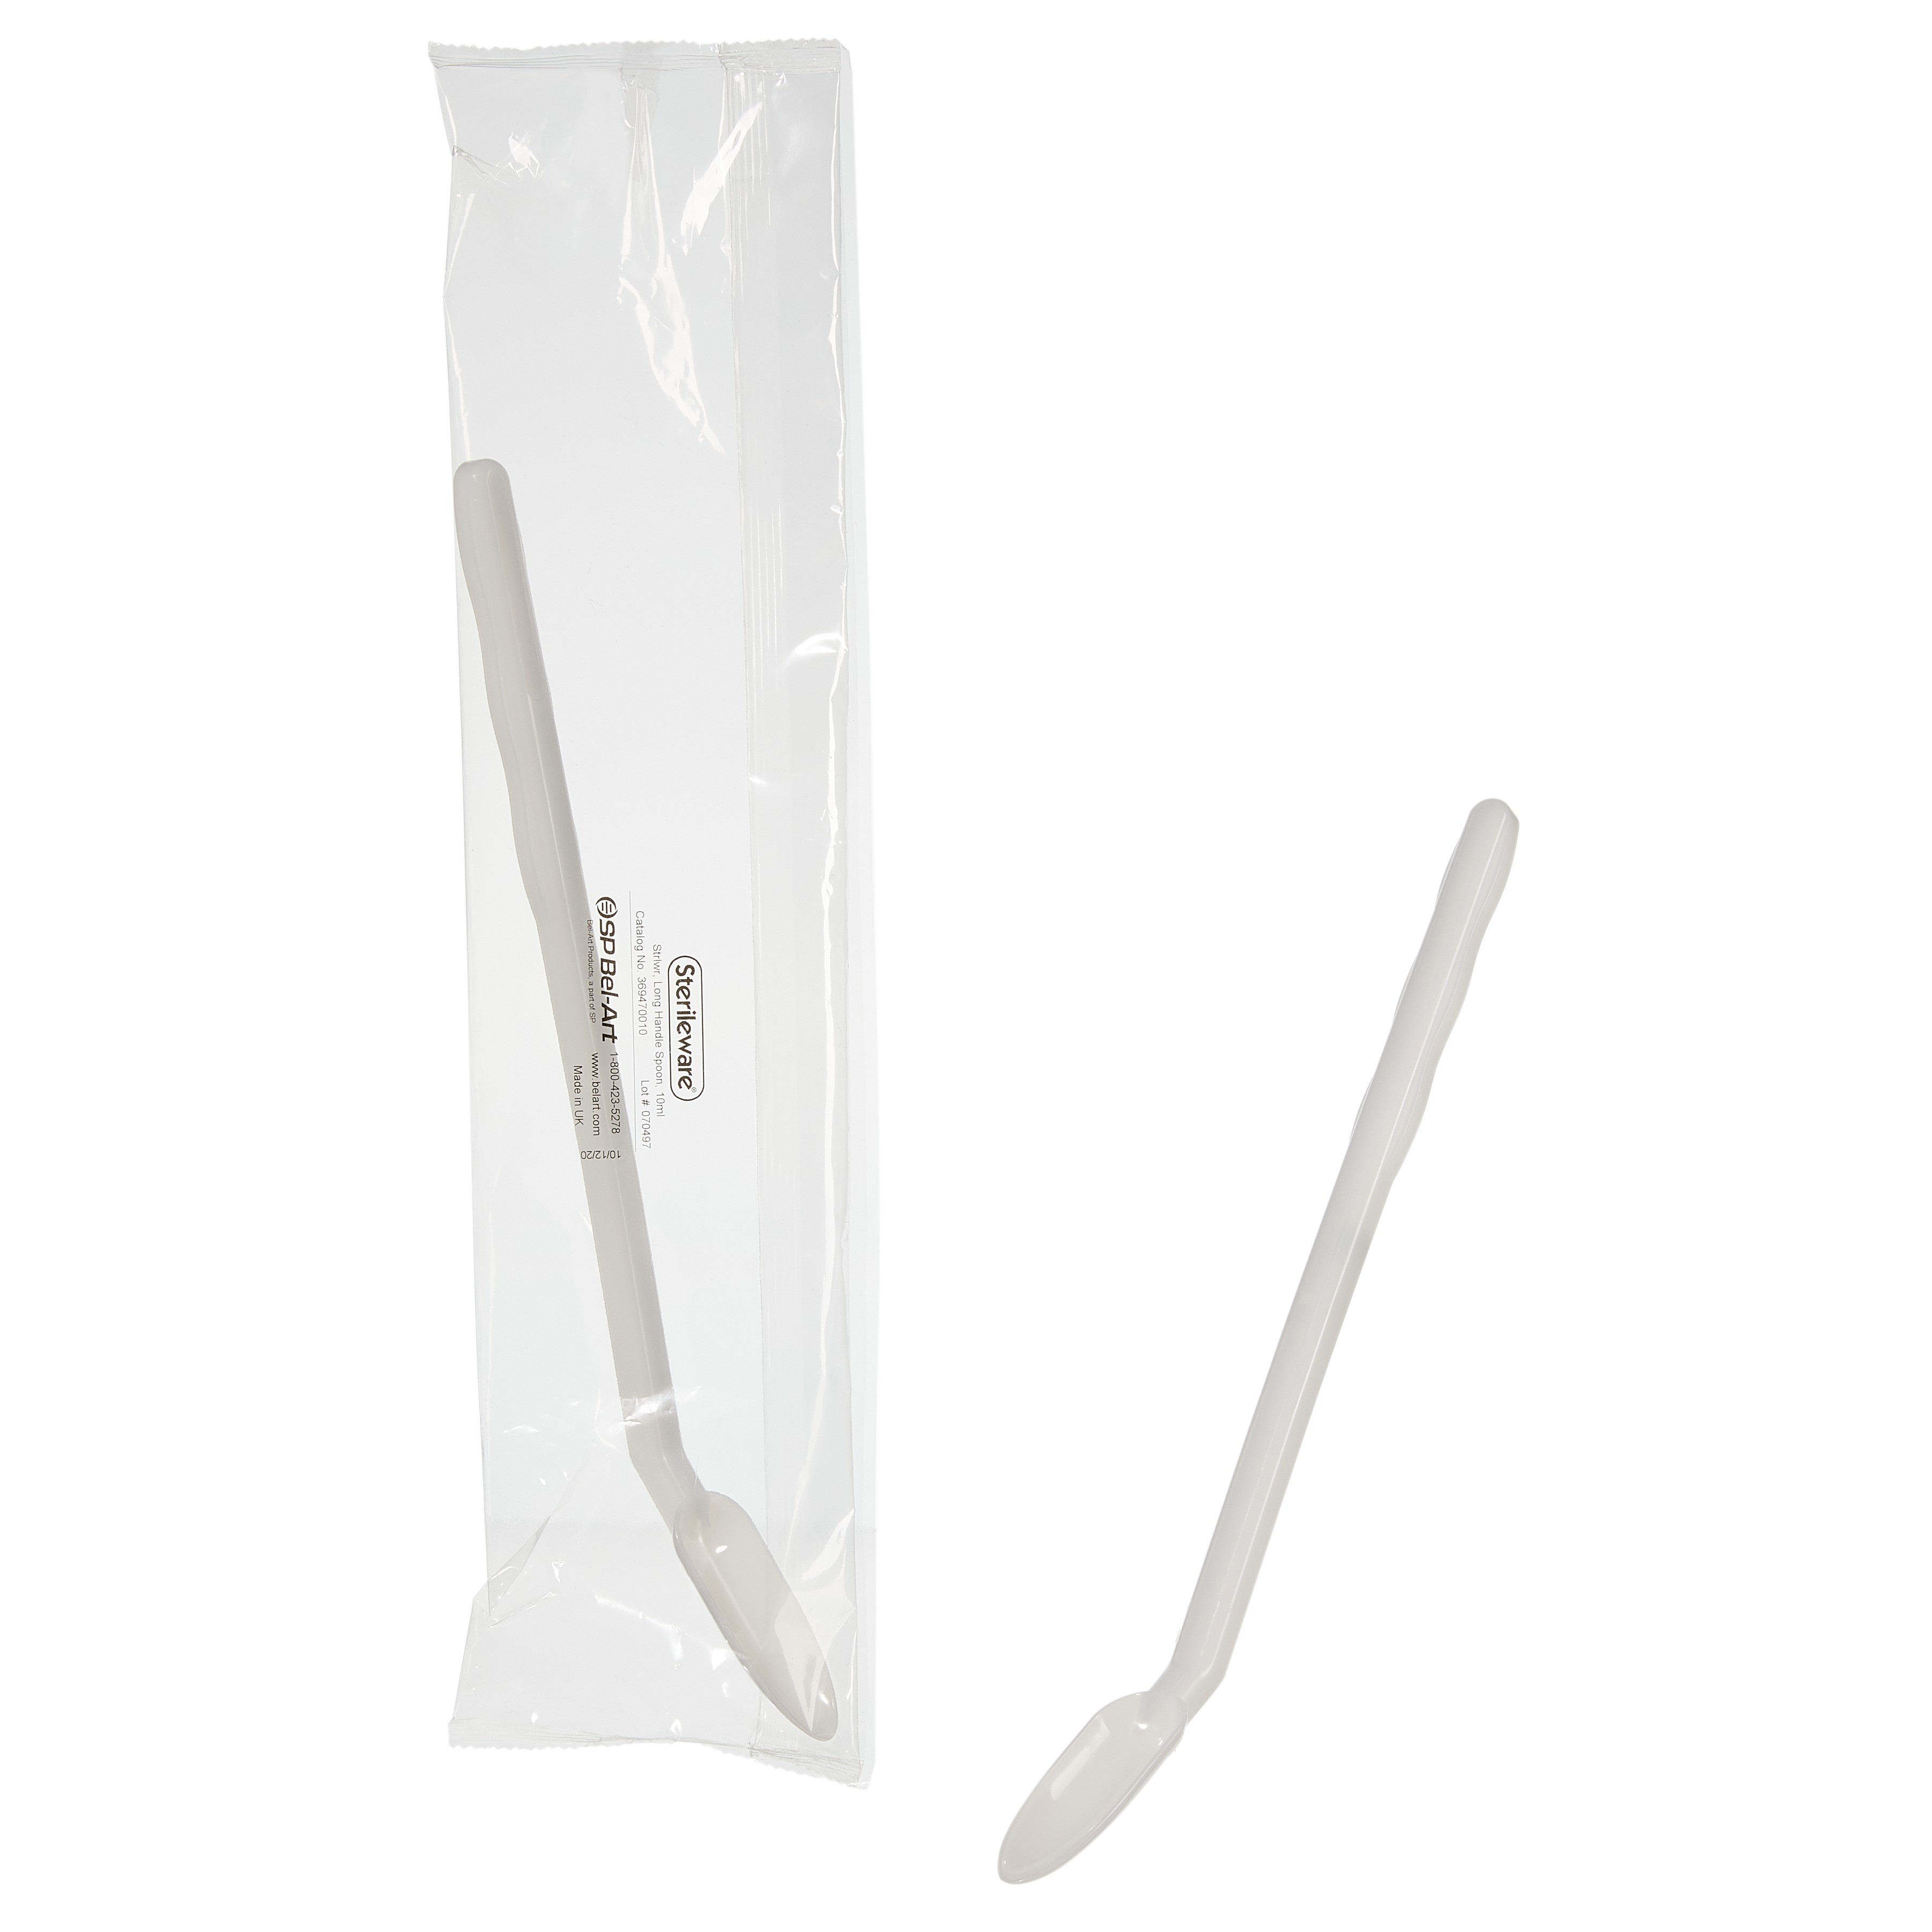 Sterileware Extra-Long, Bent Handle Spoons; 10ml, Individually Wrapped (Pack of 100)